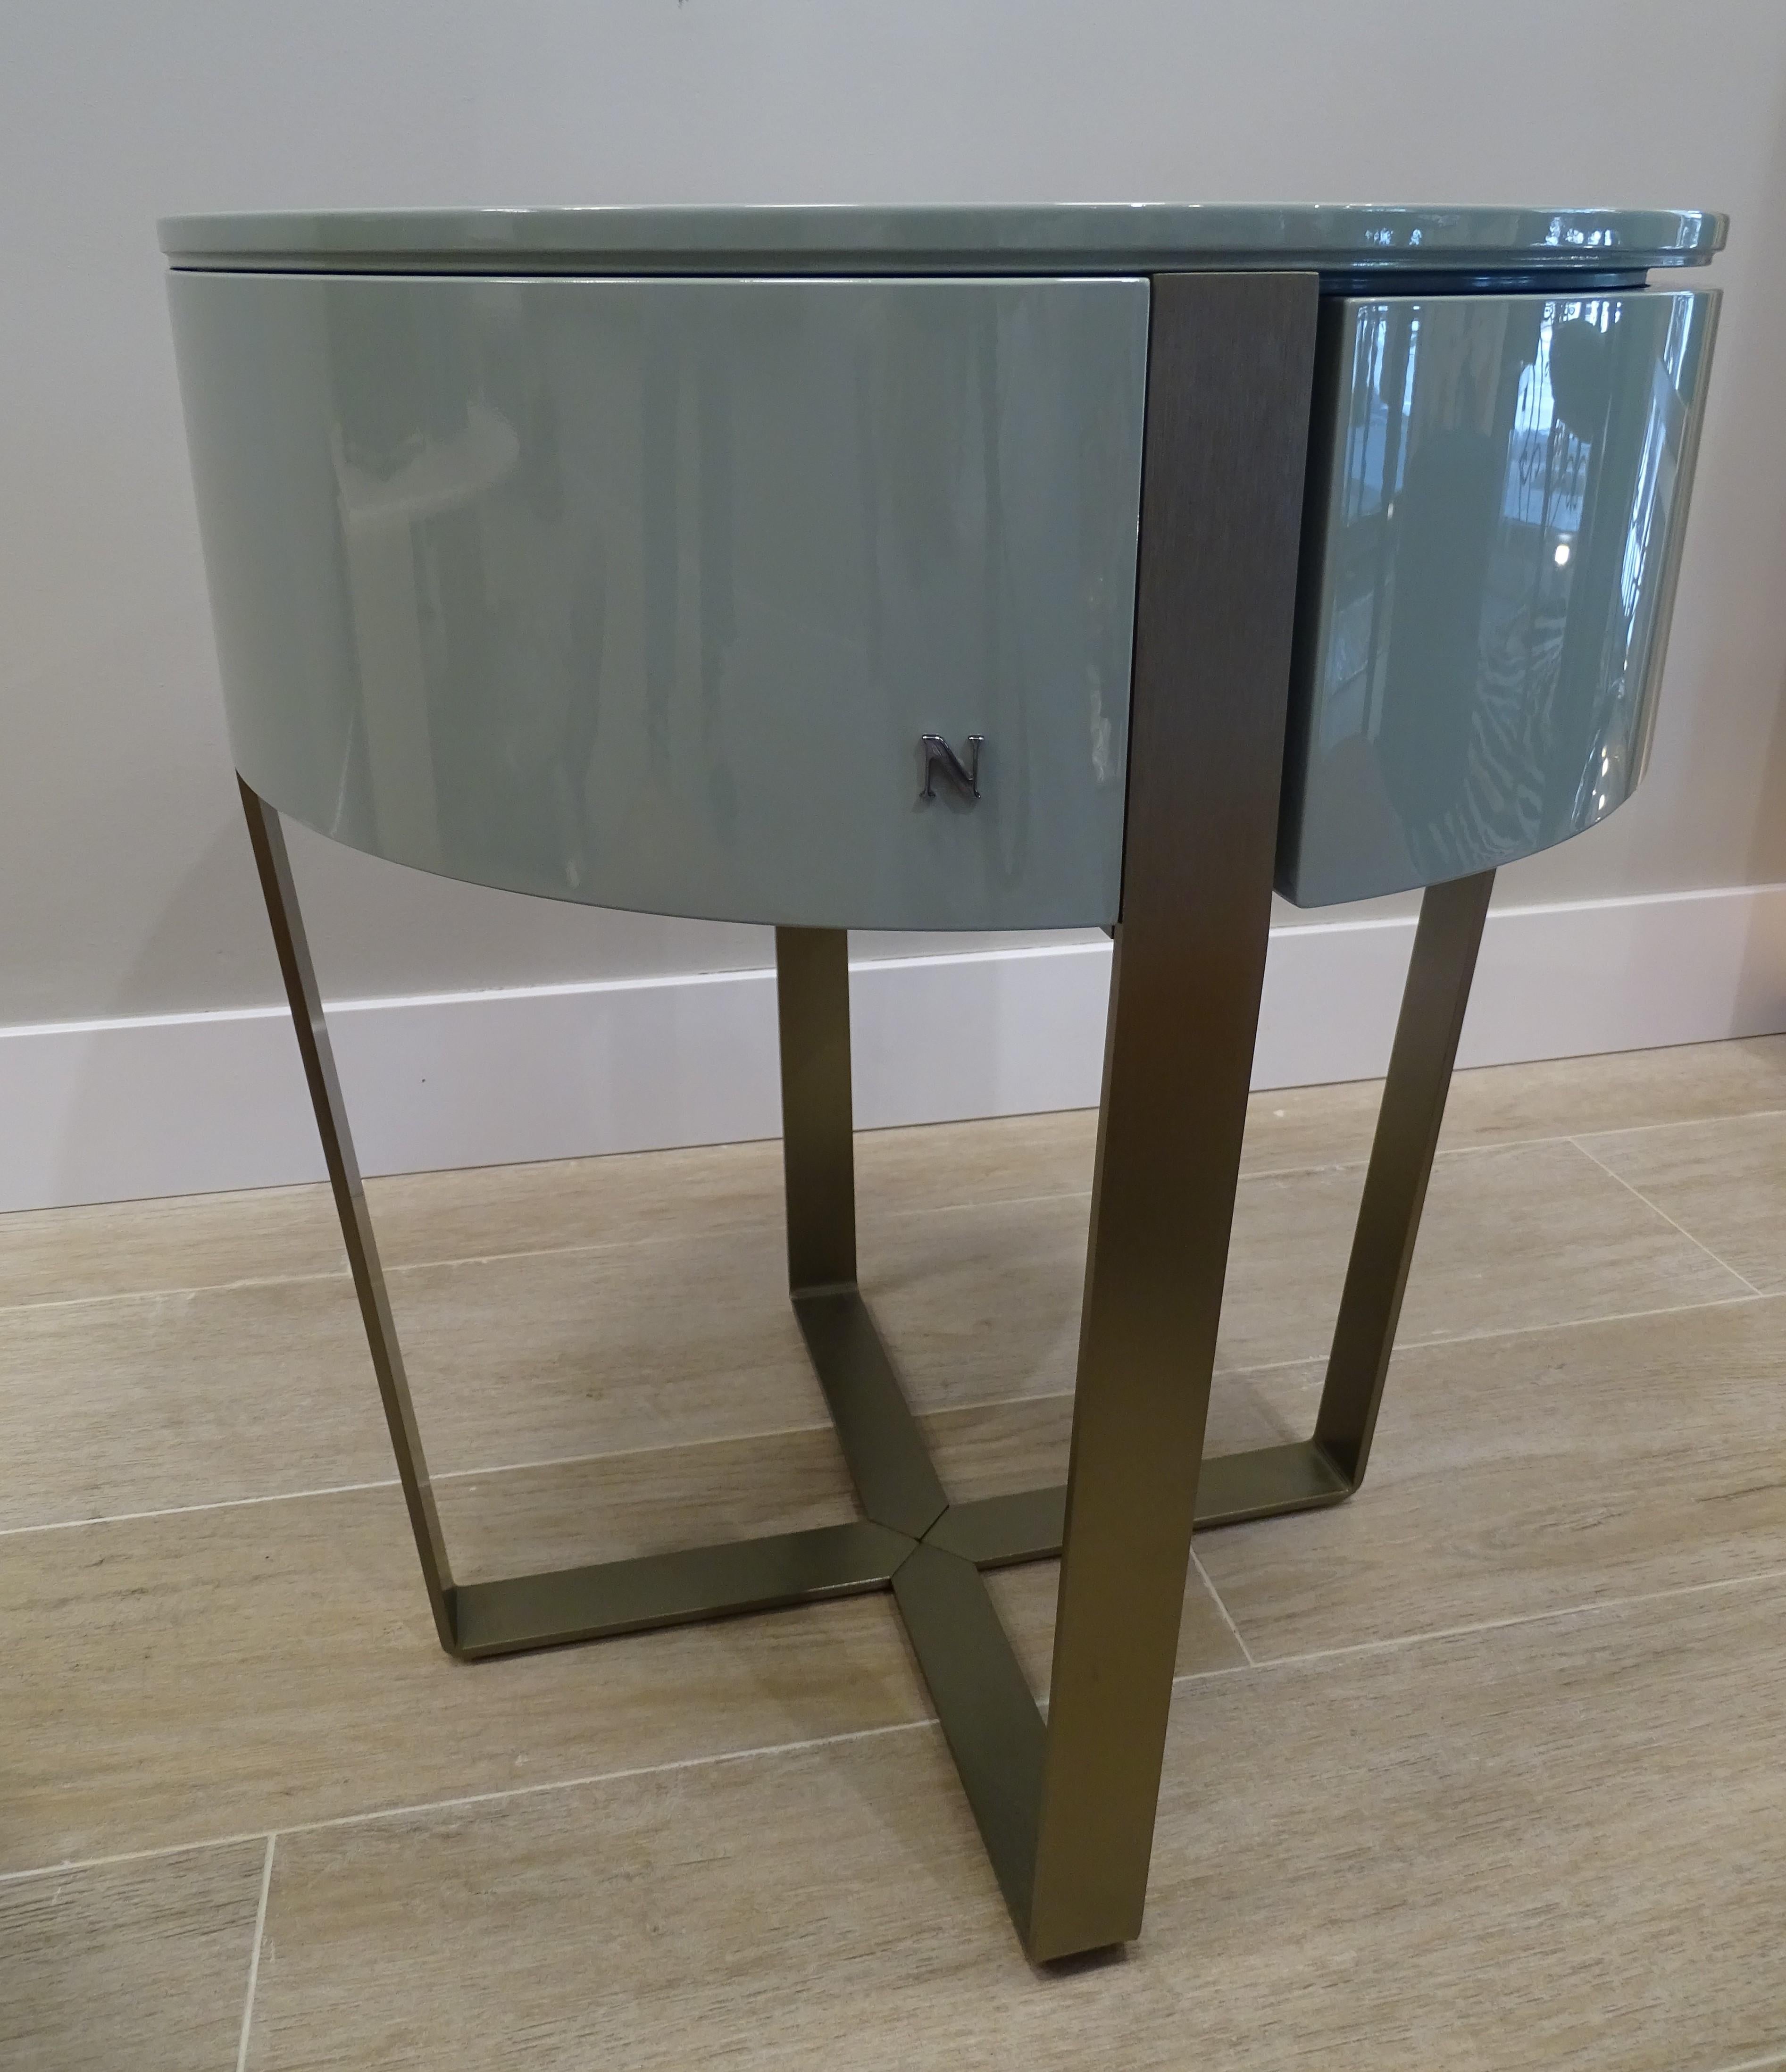 Brass Natuzzi Italian Green Sidetable in Glossy Celadon Colour, One Drawer